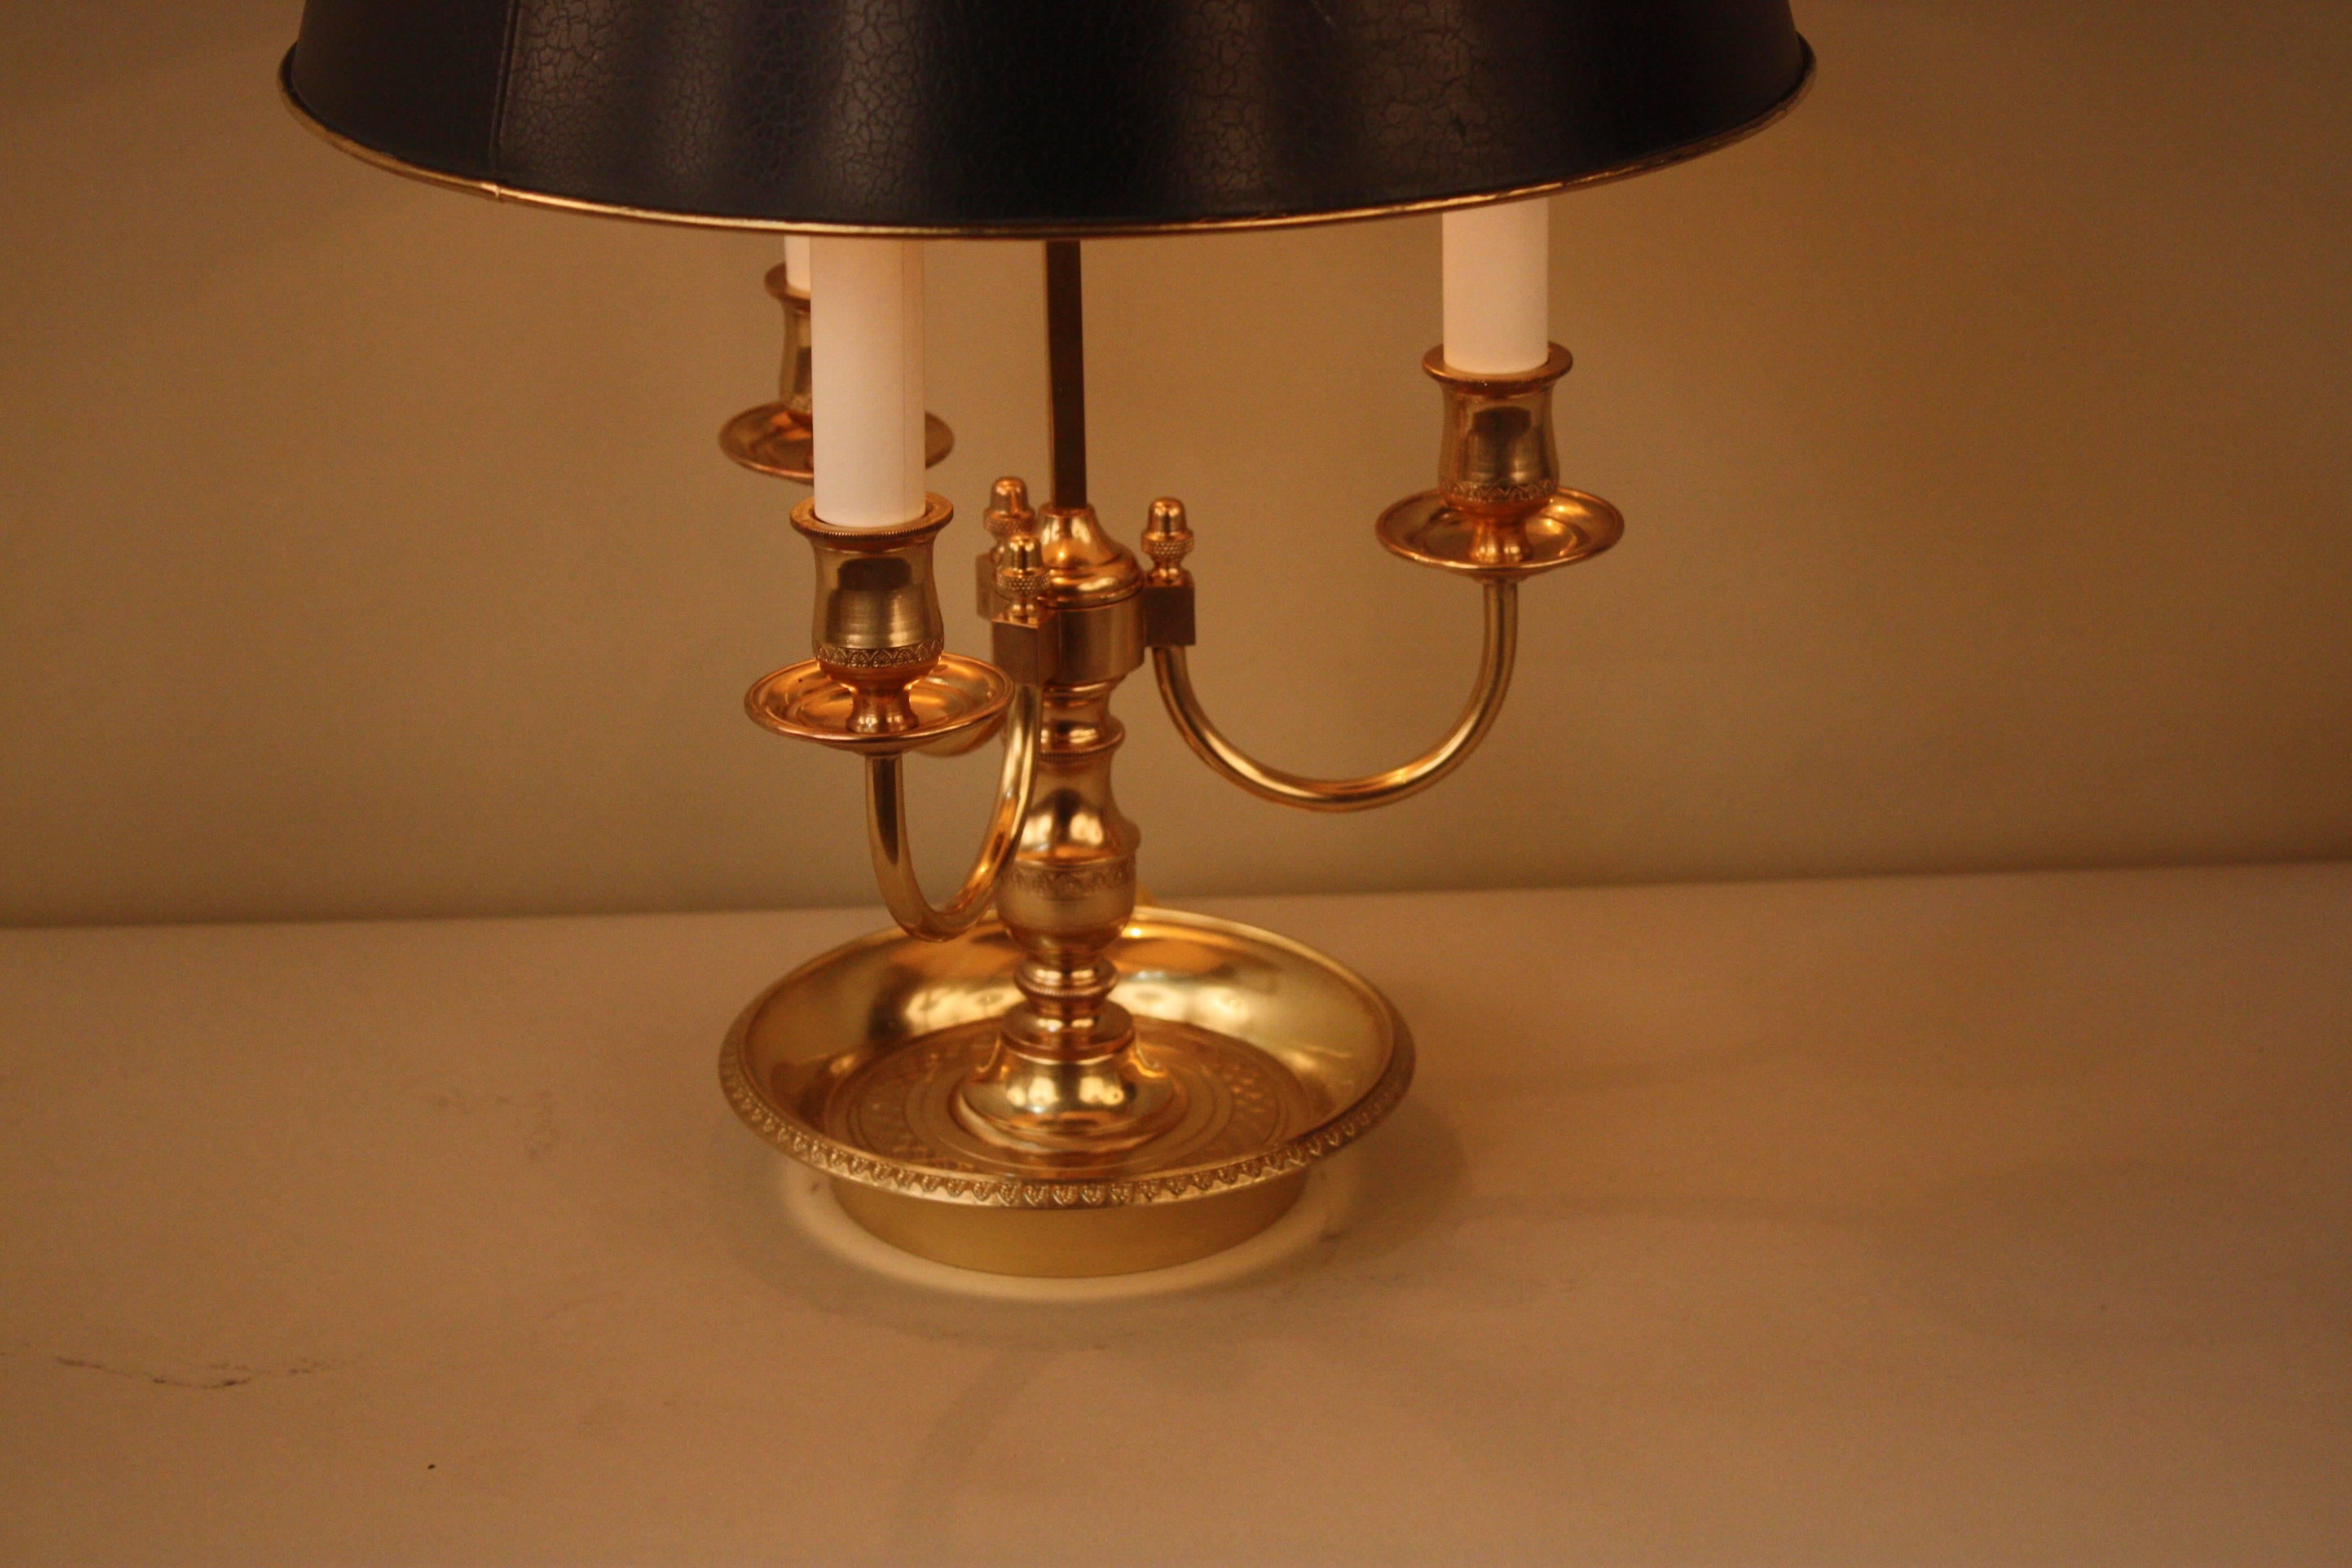 French 1920s three-light bronze desk lamp with adjustable painted metal shade.